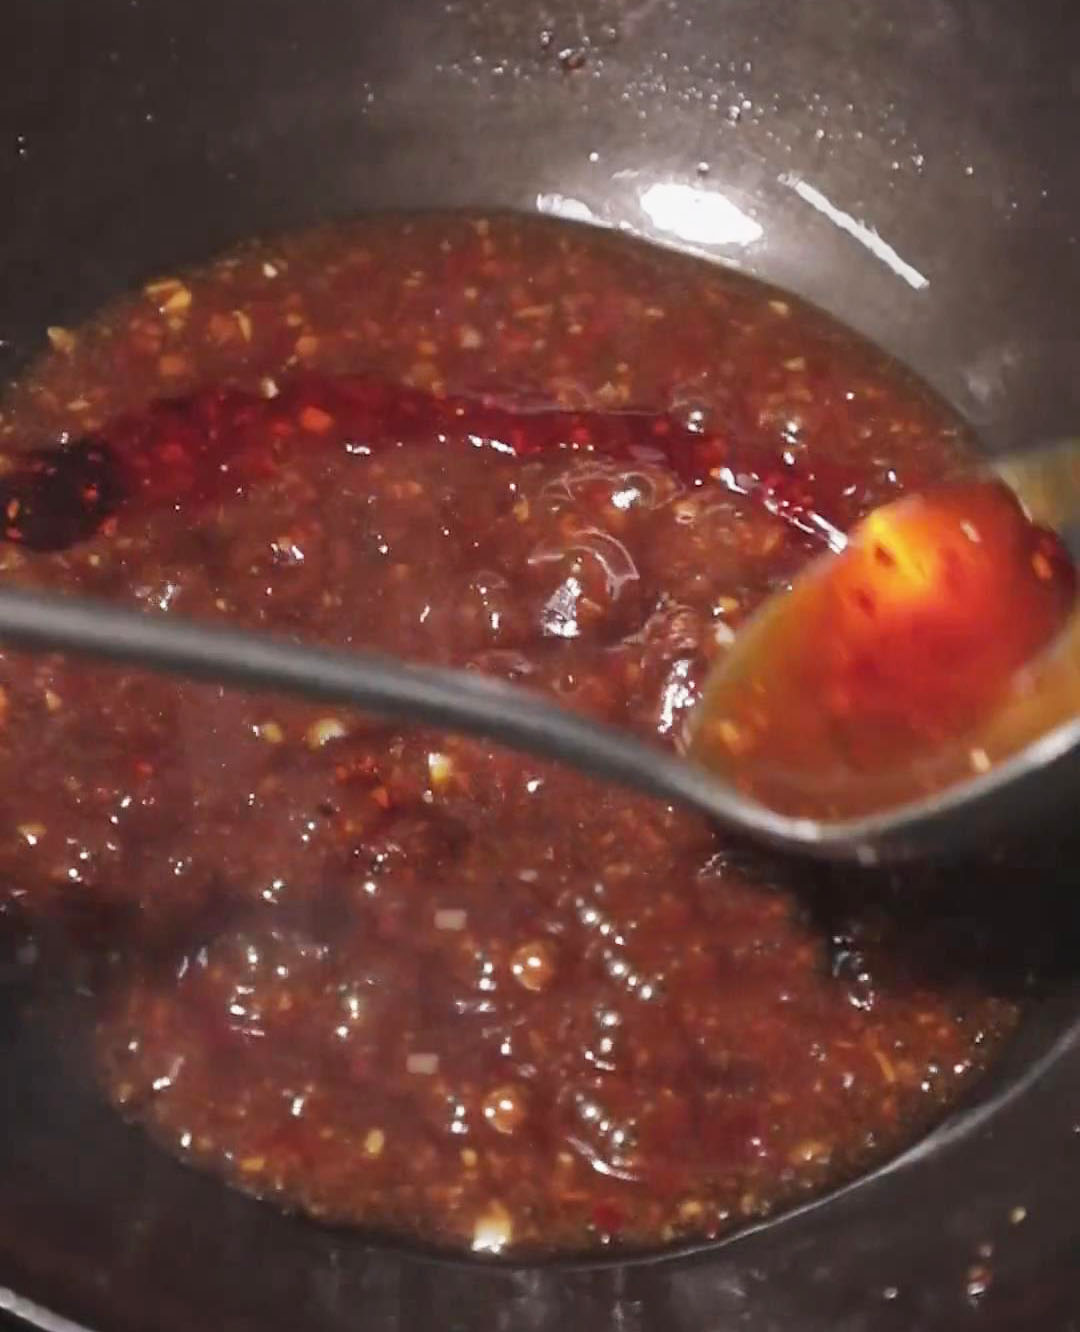 Finish the sauce by drizzling red chili oil